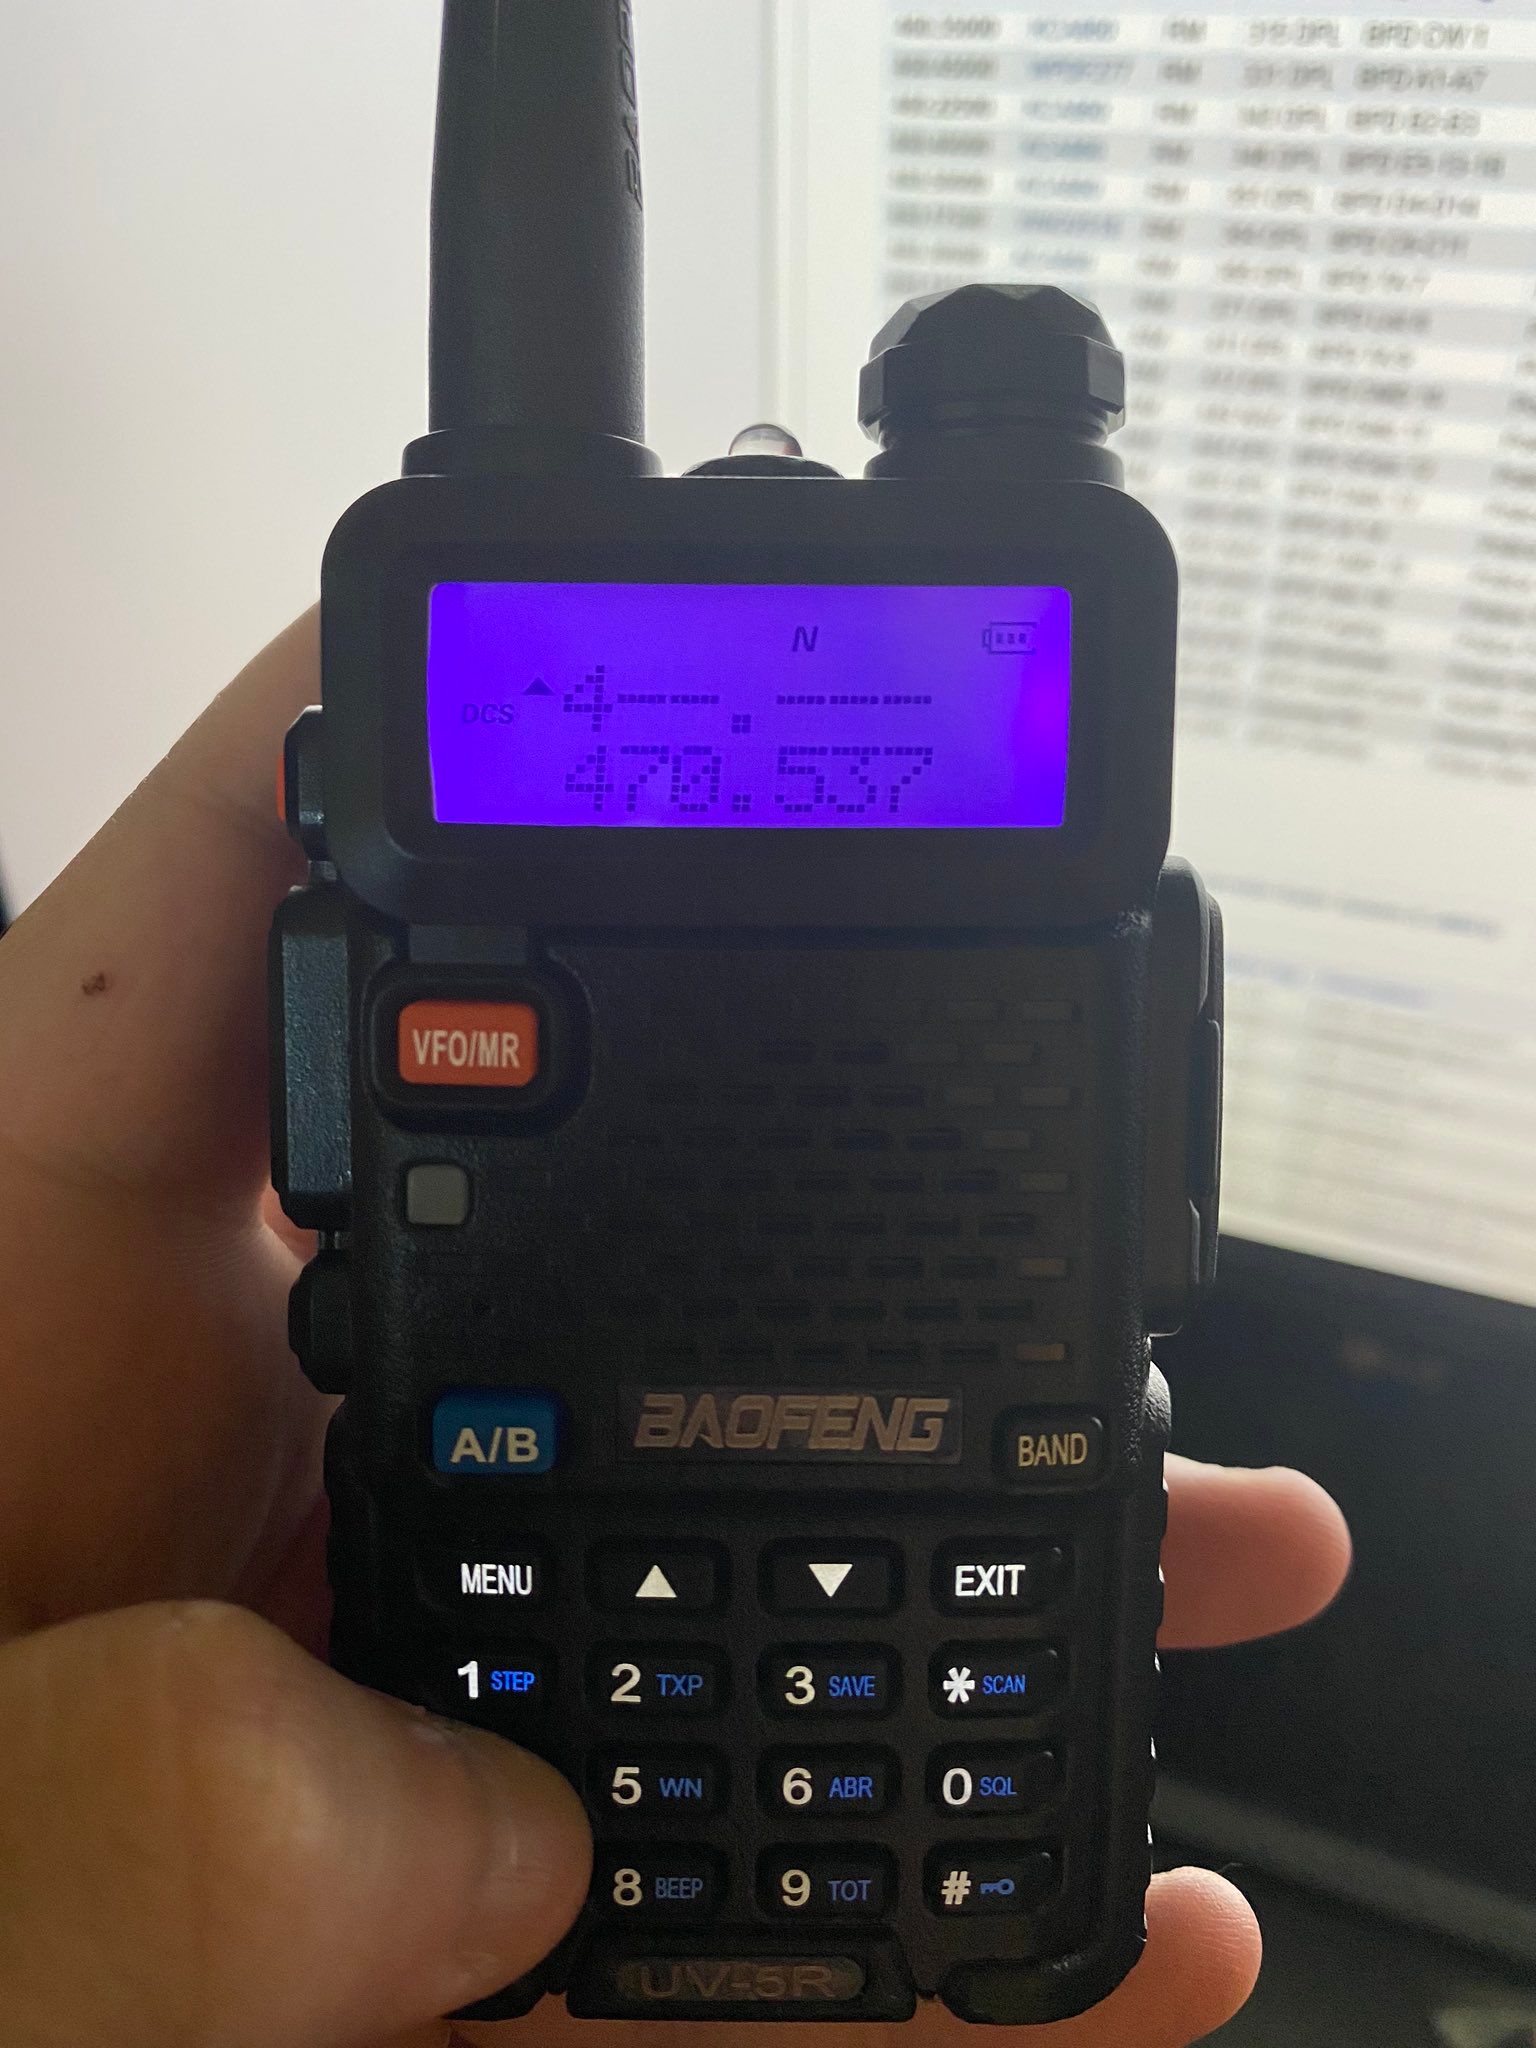 The Baofeng UV-5R and You